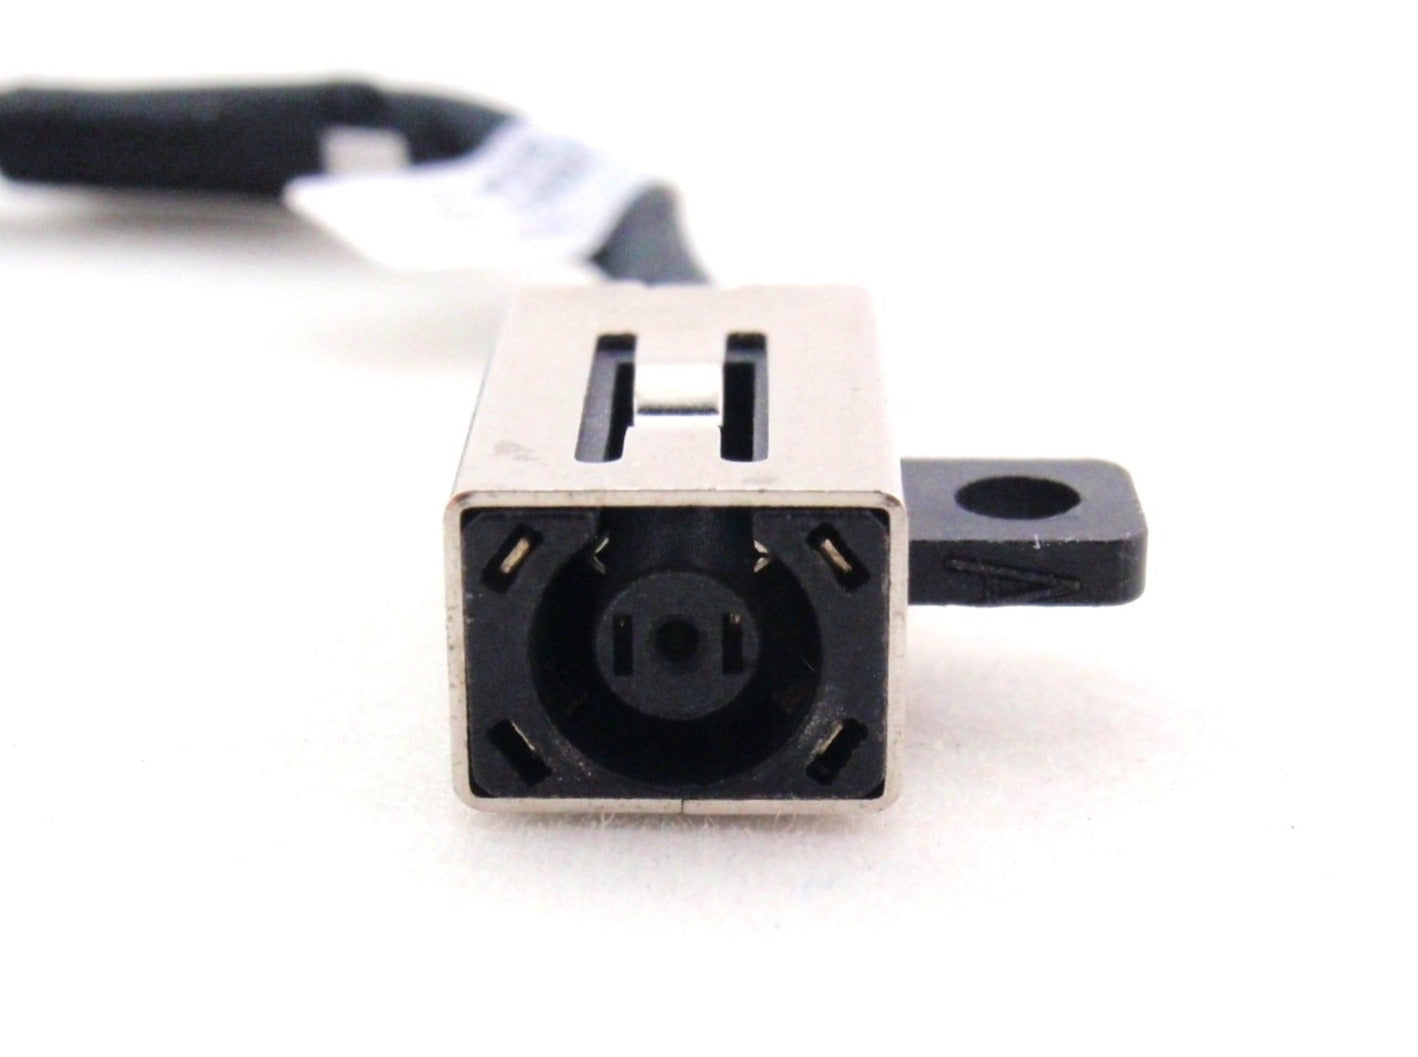 Dell New DC In Power Jack Charging Port Connector Cable Inspiron 15 7506 2-in-1 450.0K305.0001 .0021 0VGYC4 VGYC4